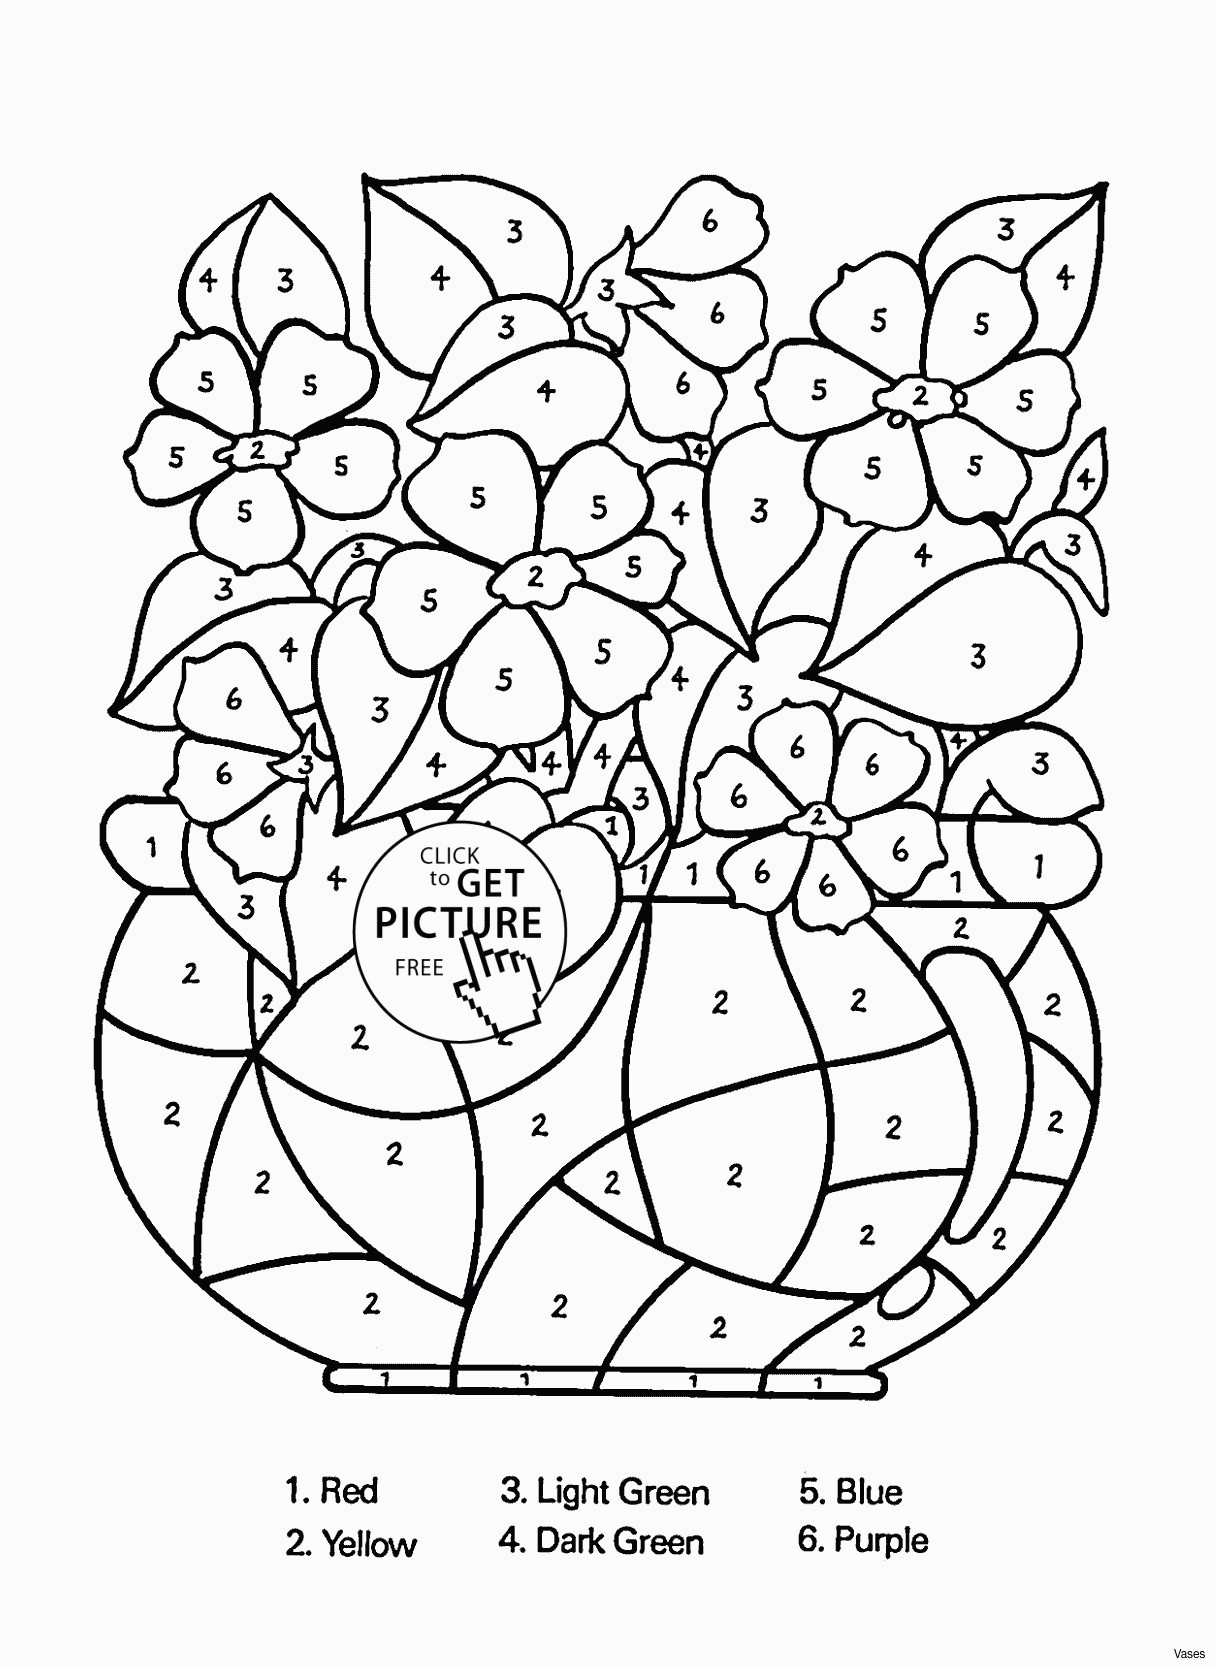 Small Black Glass Vase Of Luxury 34 Awesome Jasmine Flower Garland Best Roses Flower Pertaining to Elegant Vases Flower Vase Coloring Page Pages Flowers In A top I 0d and Of Luxury